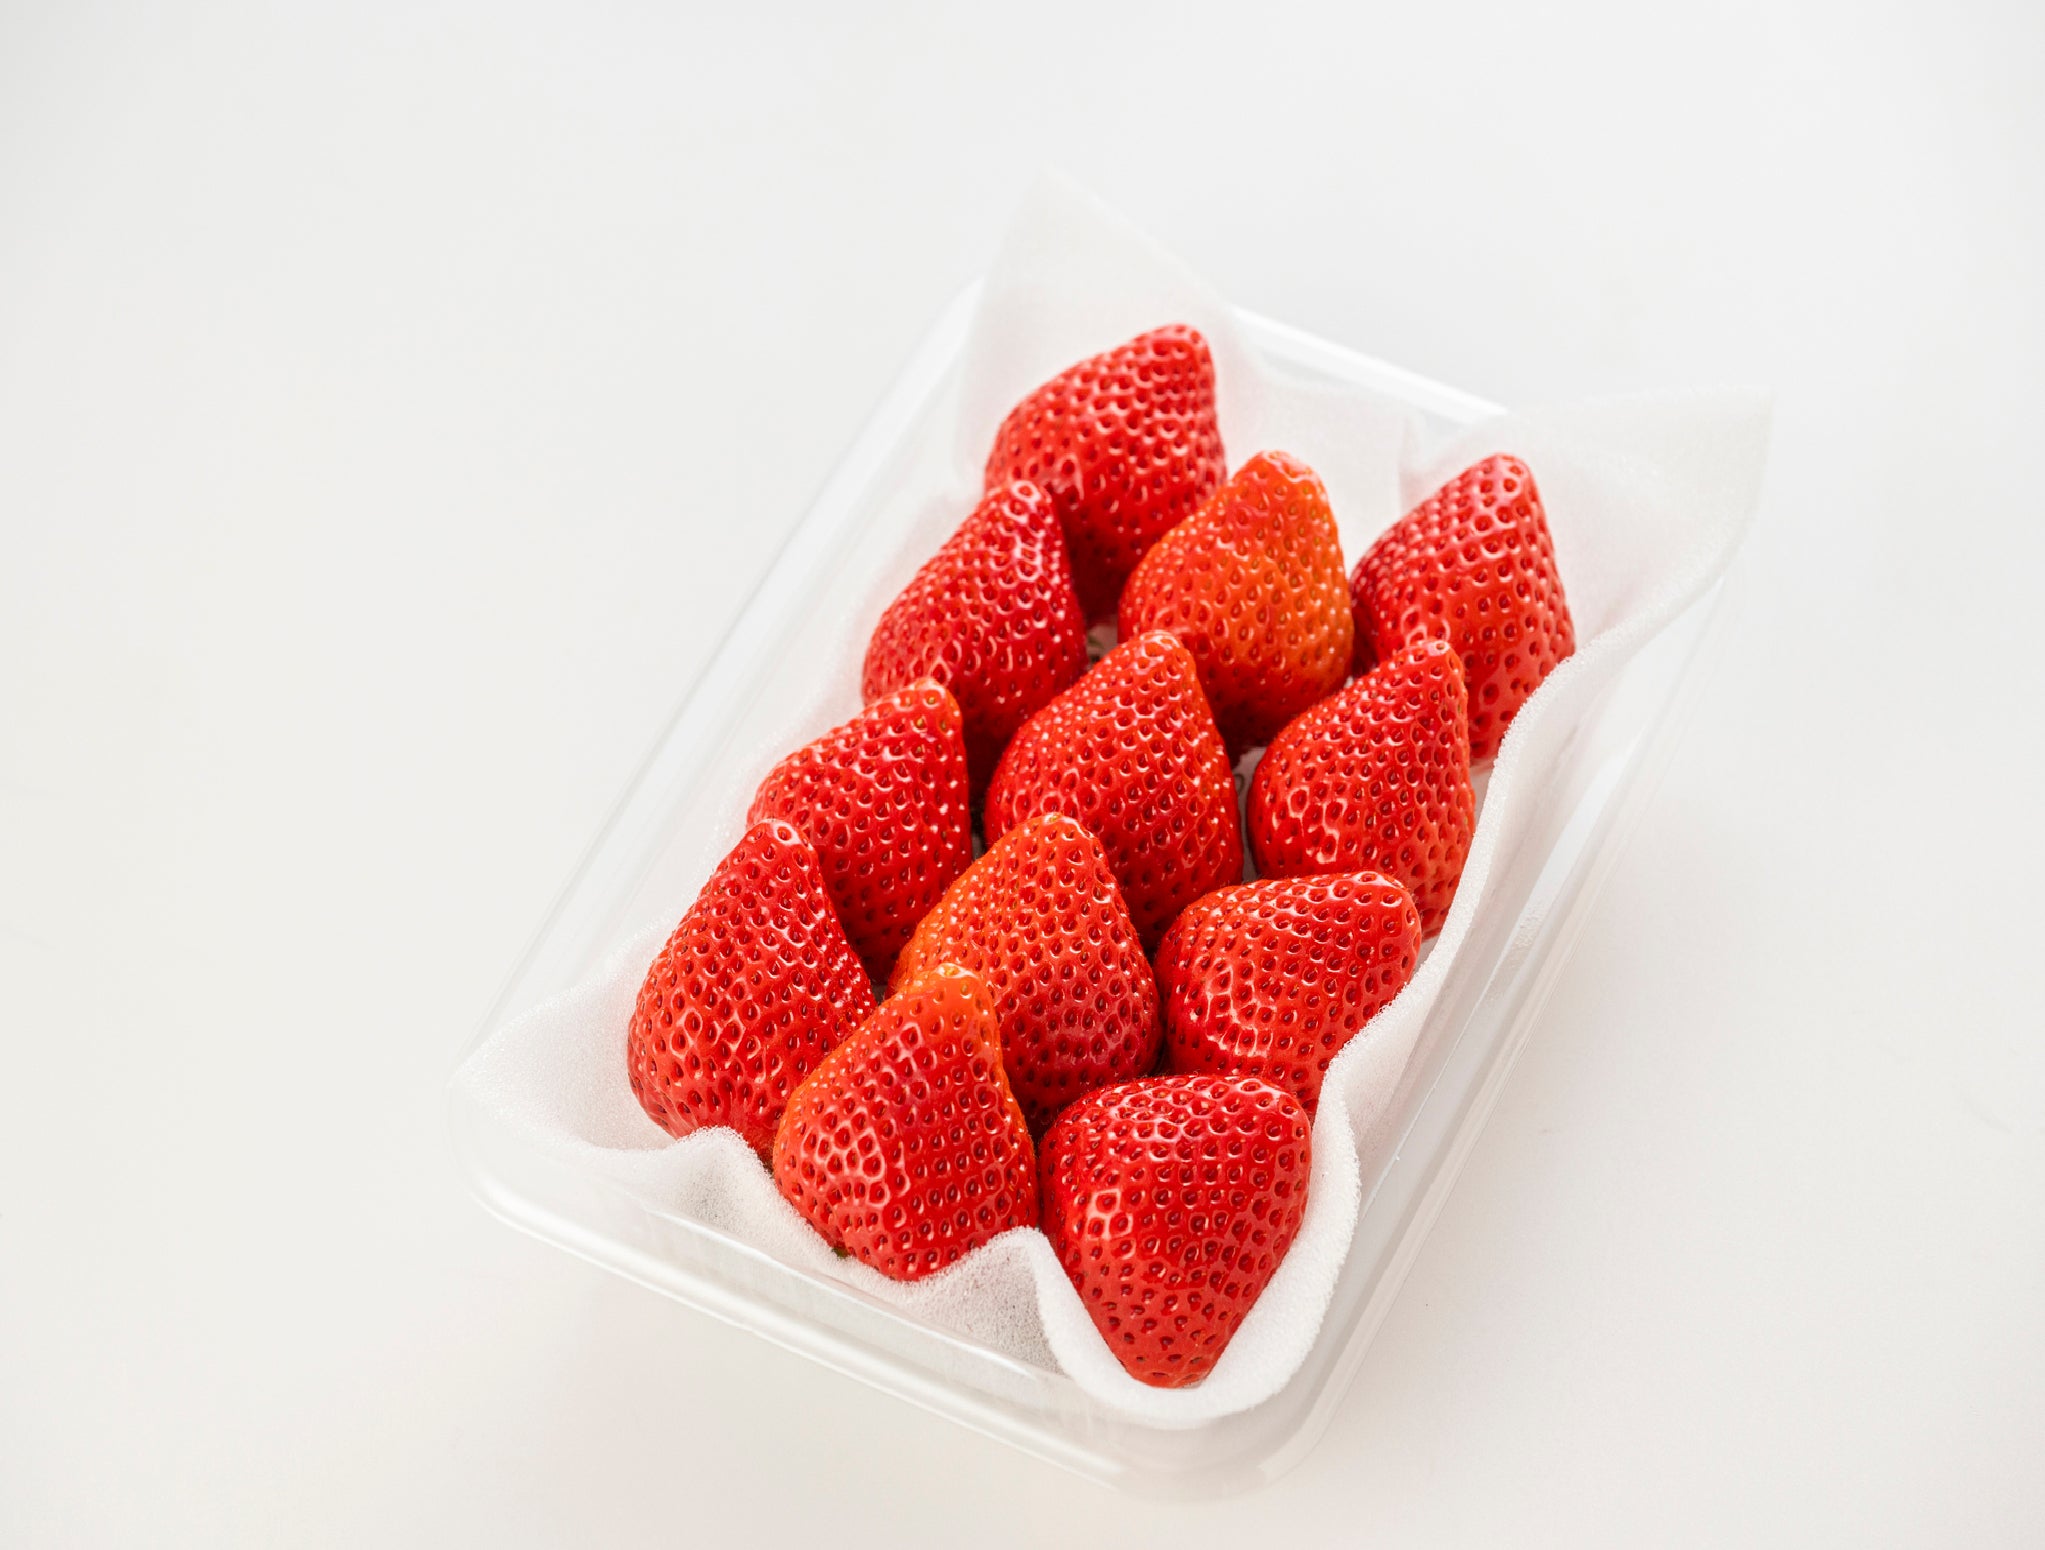 Japanese Strawberry 270g - limited availability